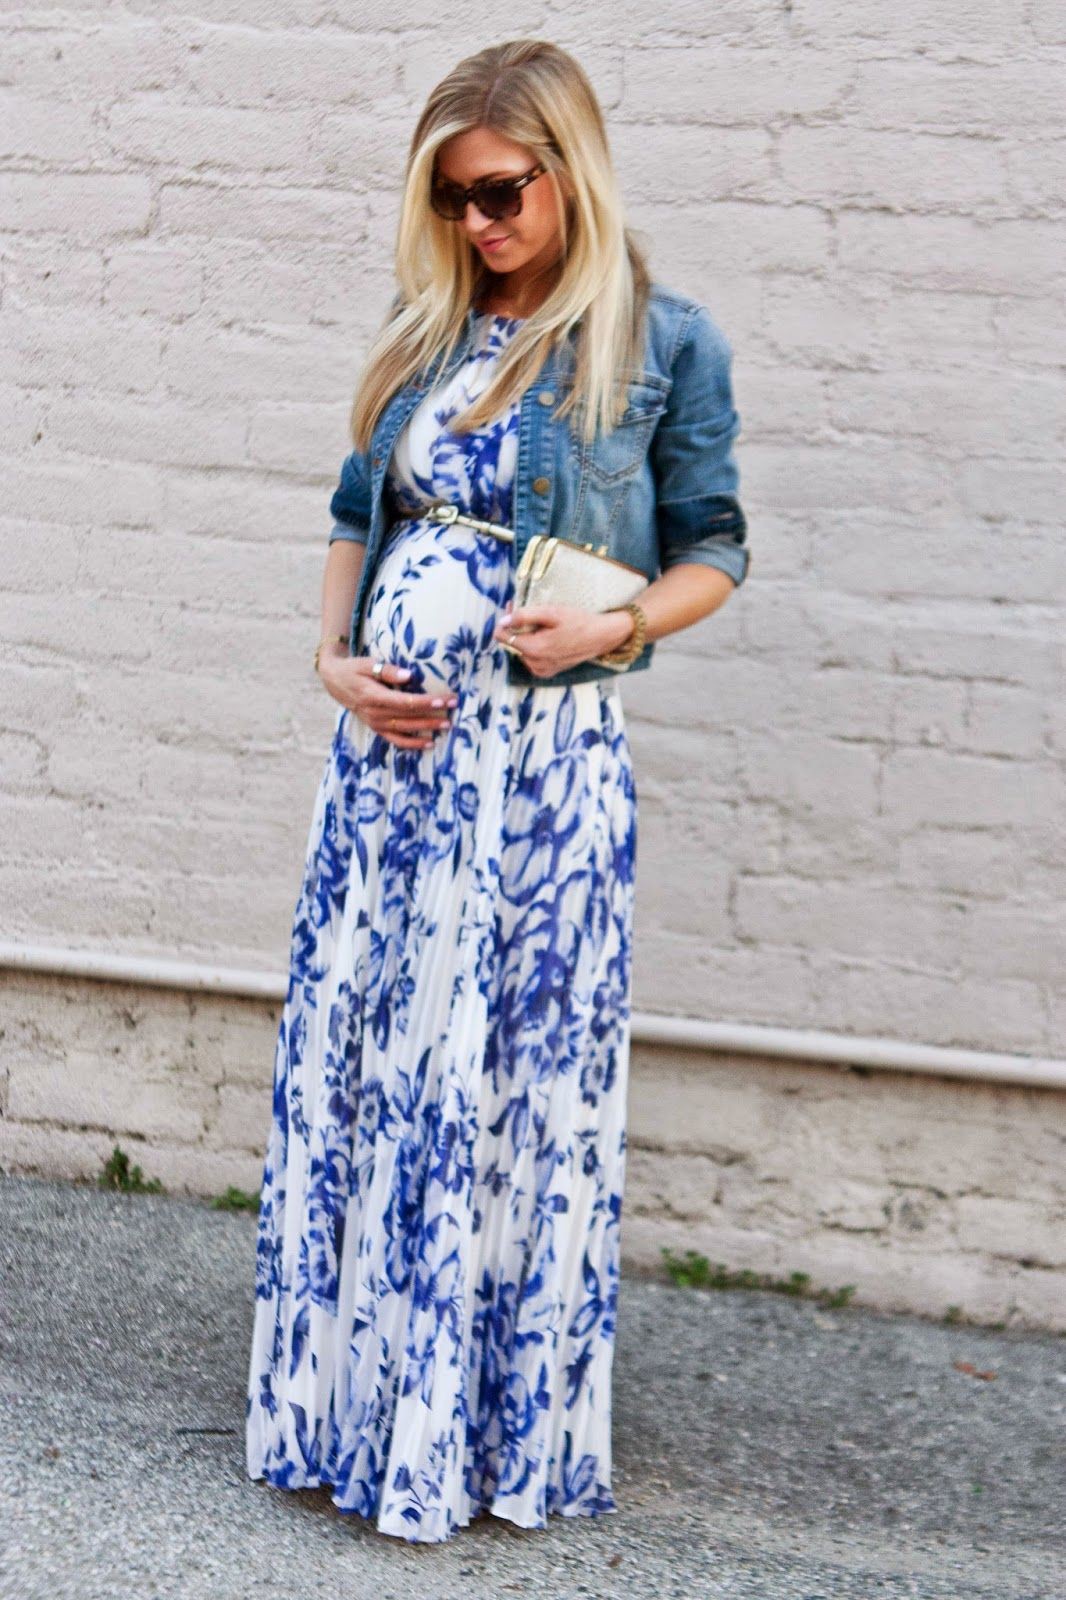 Casual Outfit Ideas For Pregnant Ladies ...